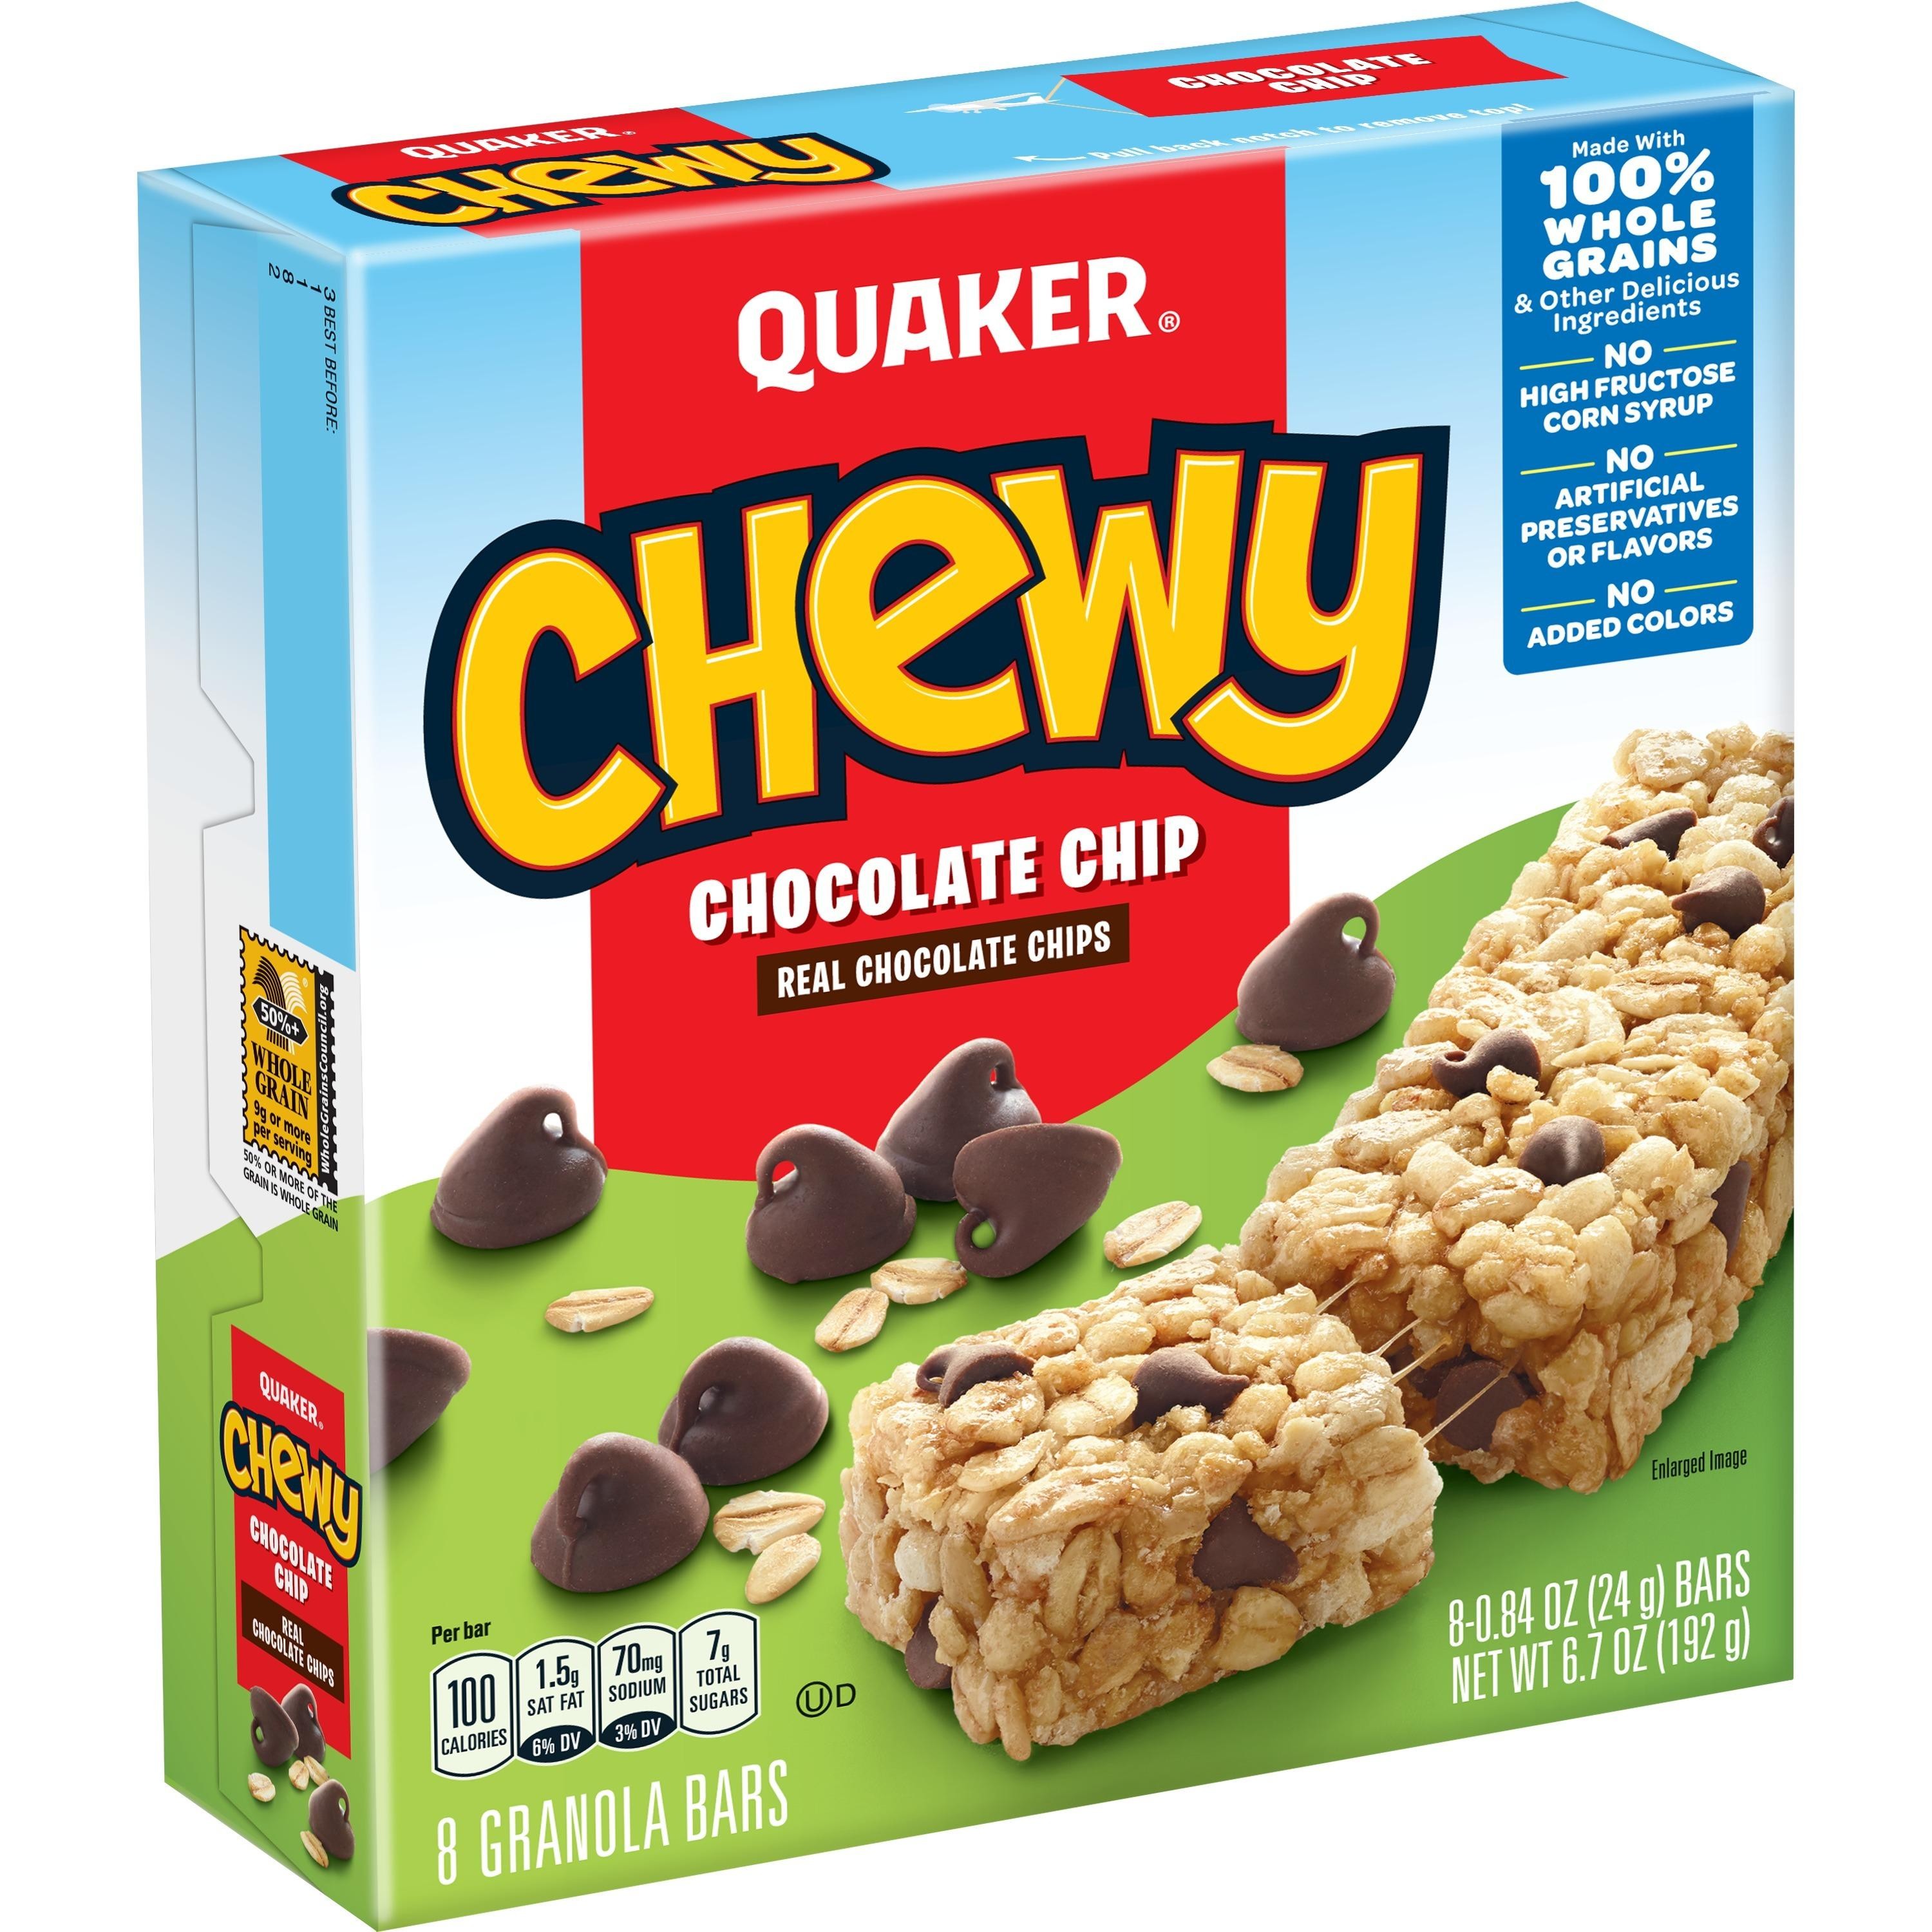 Quaker Chewy Chocolate Chip Bars 8 ct - 6.7 Oz